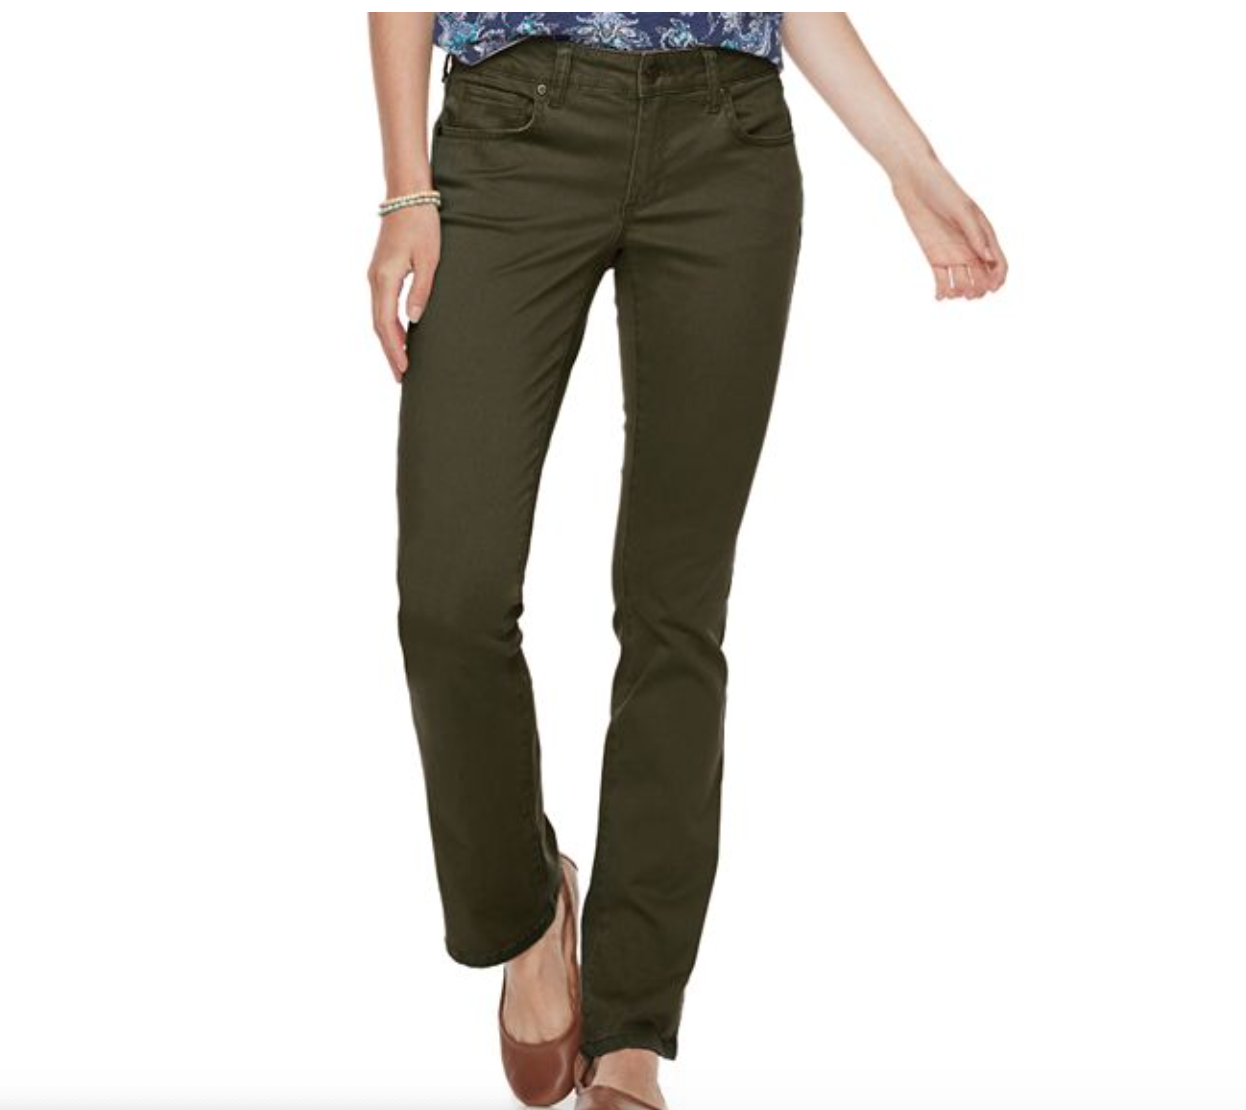 Kohl's: Women's Sonoma Pants - 4 Pairs for $42.46 - SaveSpark